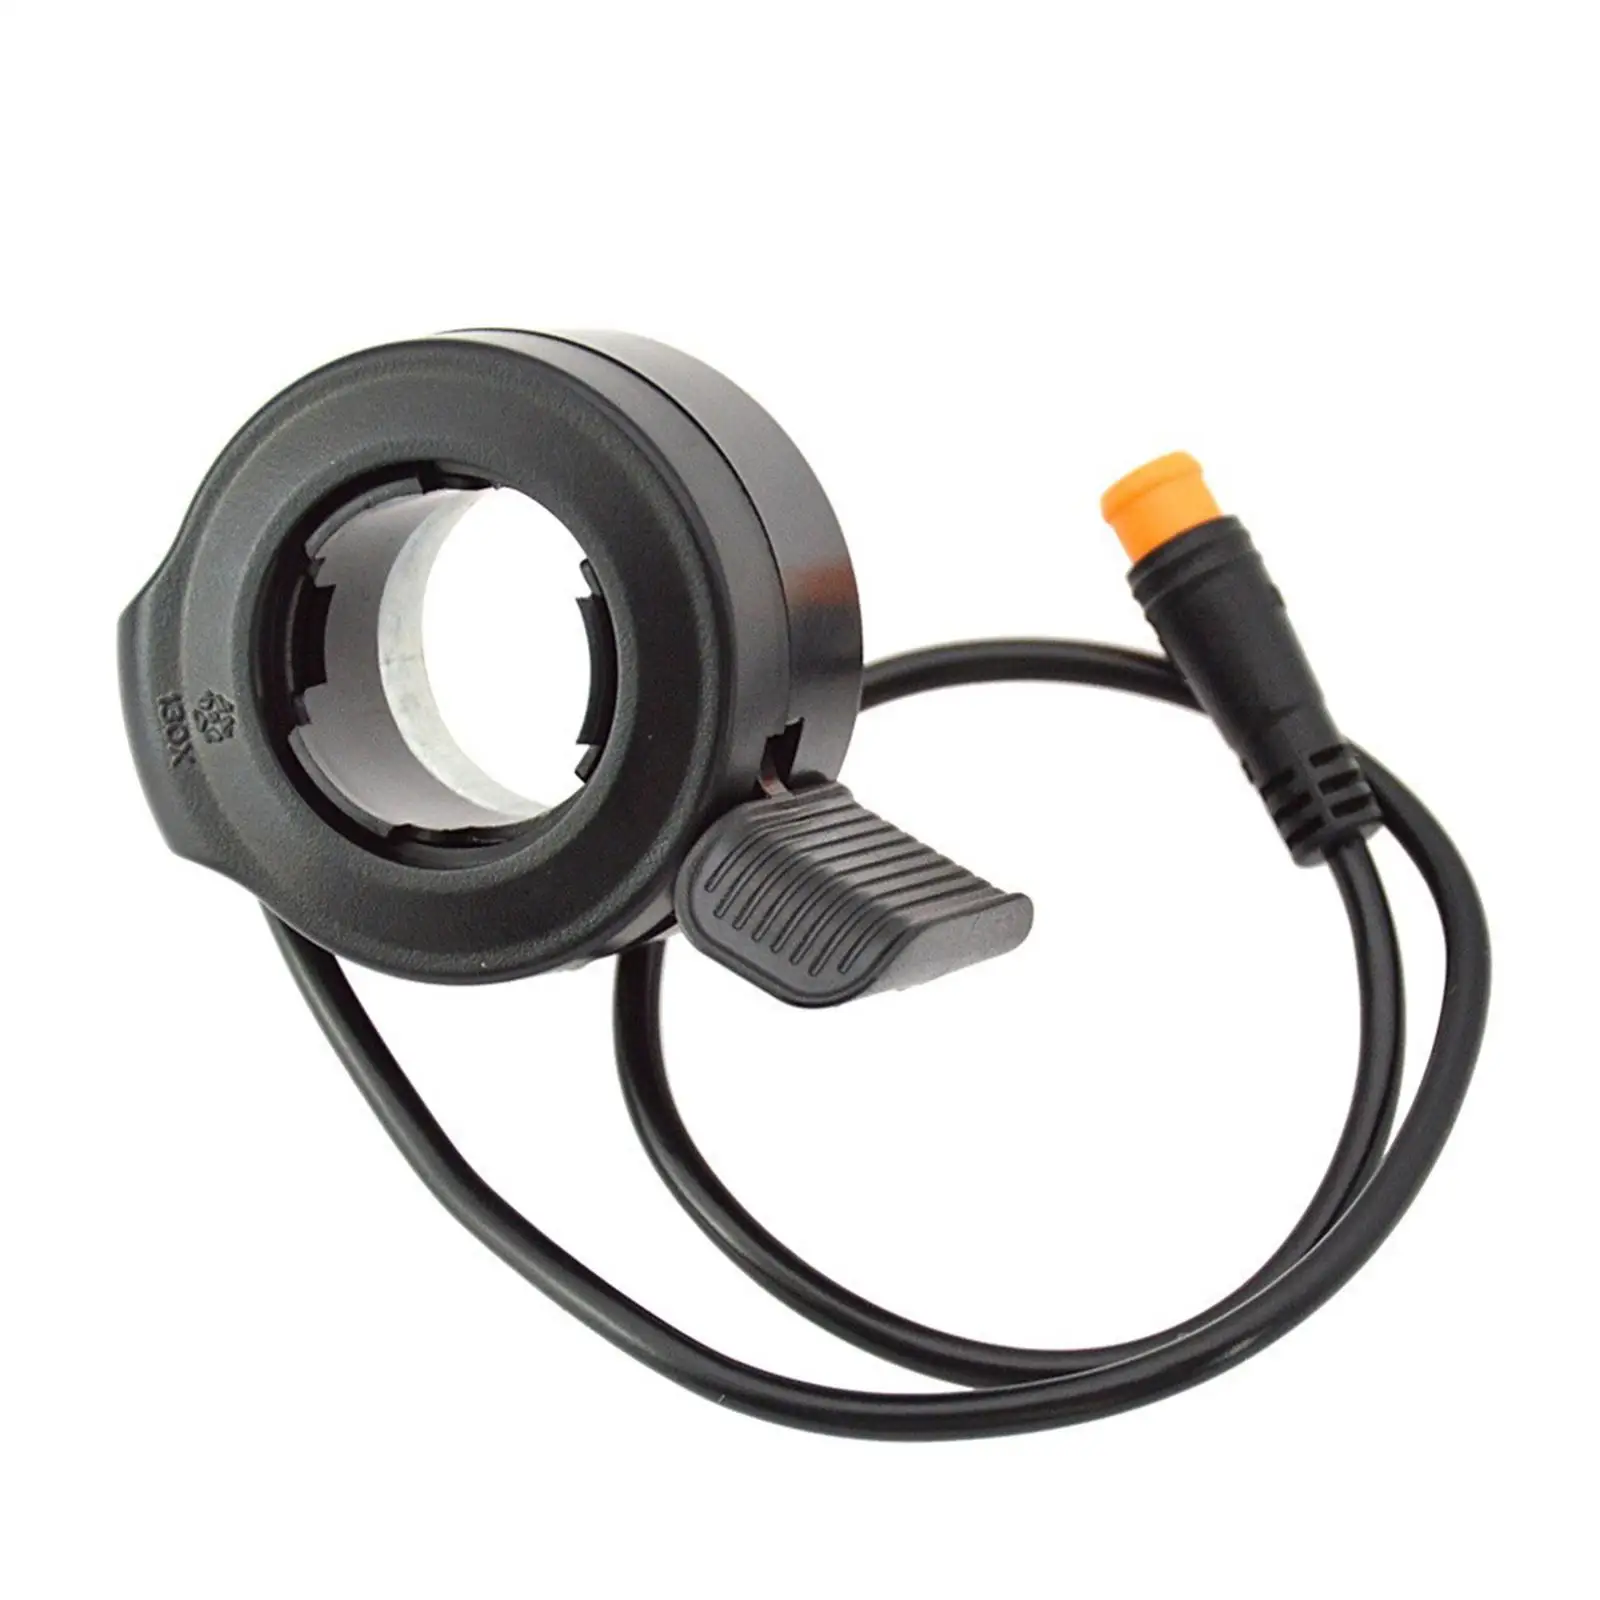 Electric Thumb Throttle Speed Control Hand Waterproof